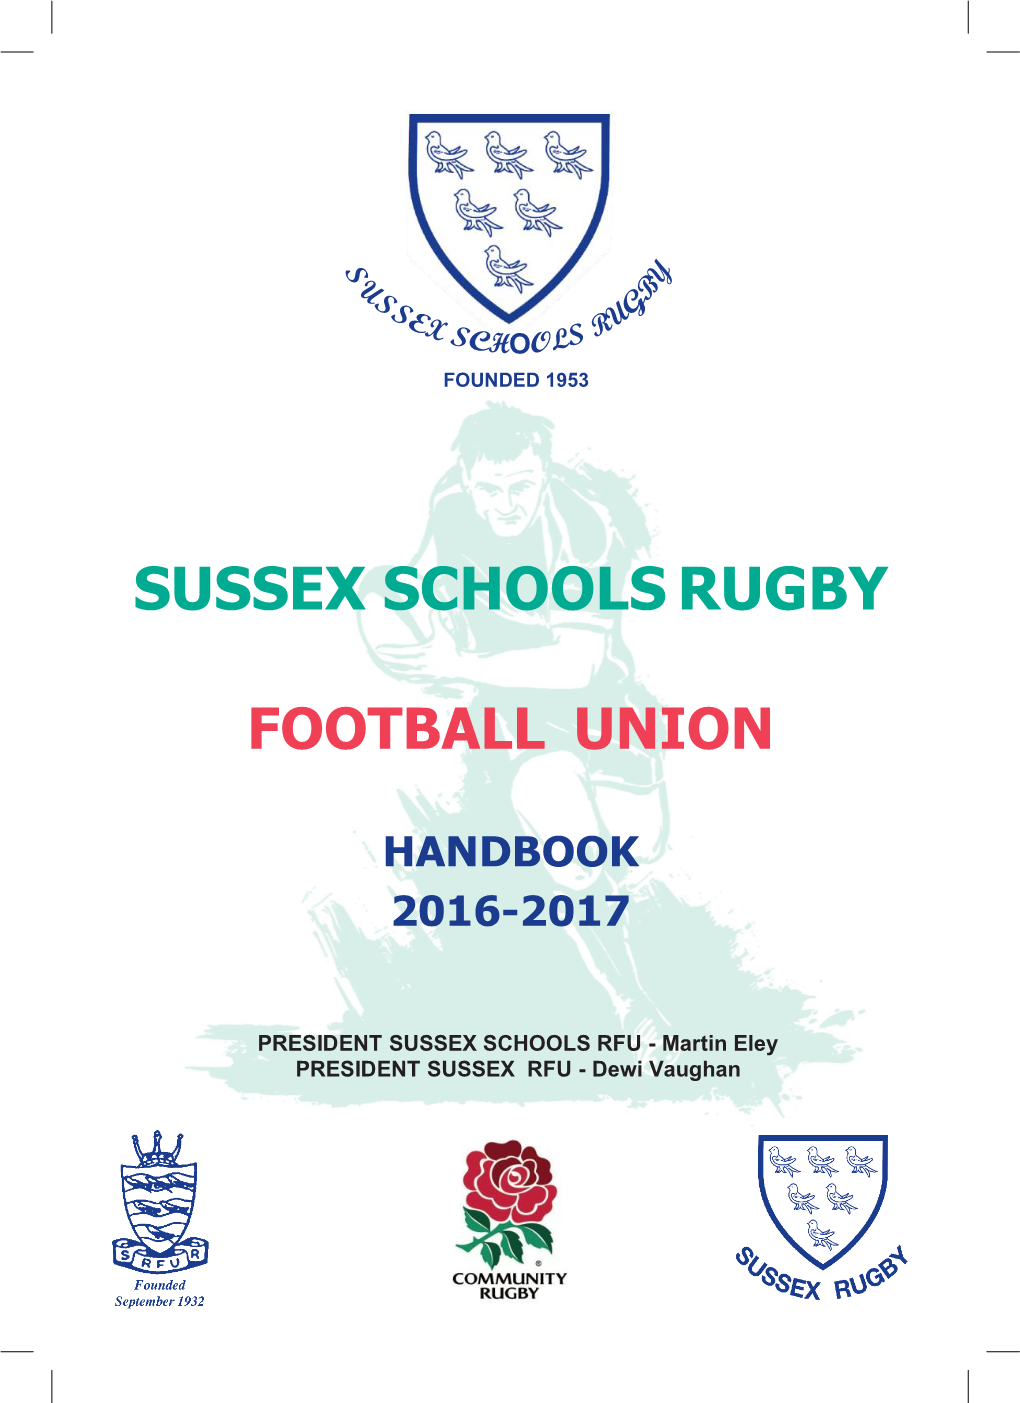 Sussex Schools Rugby